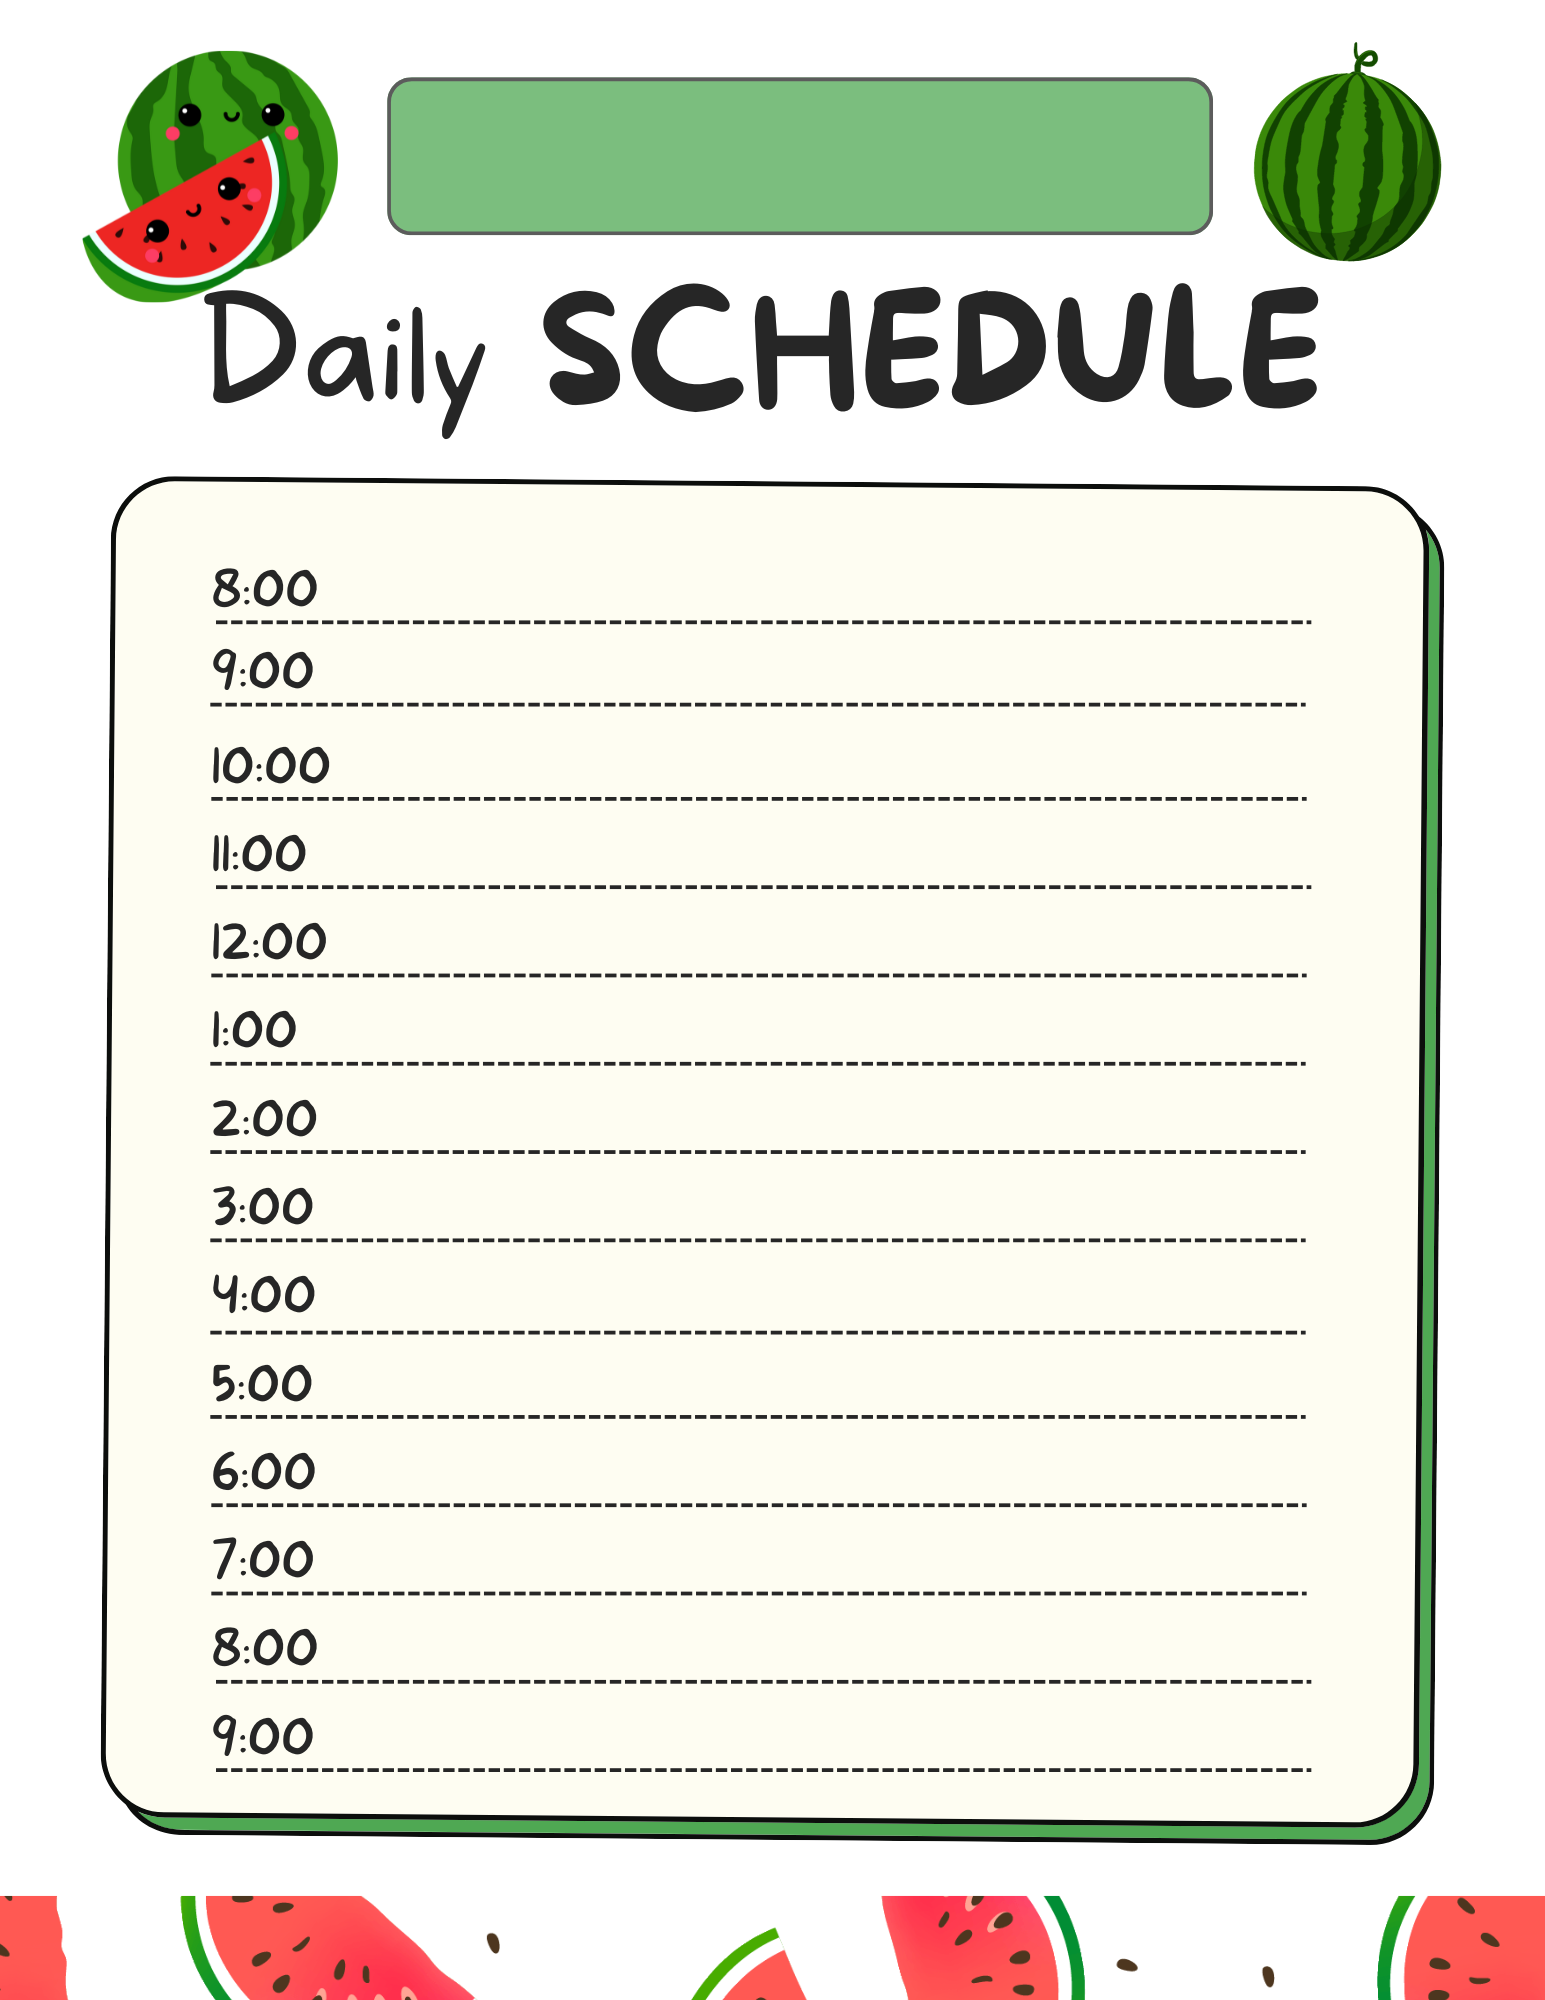 Blank sample daily and hourly schedule.